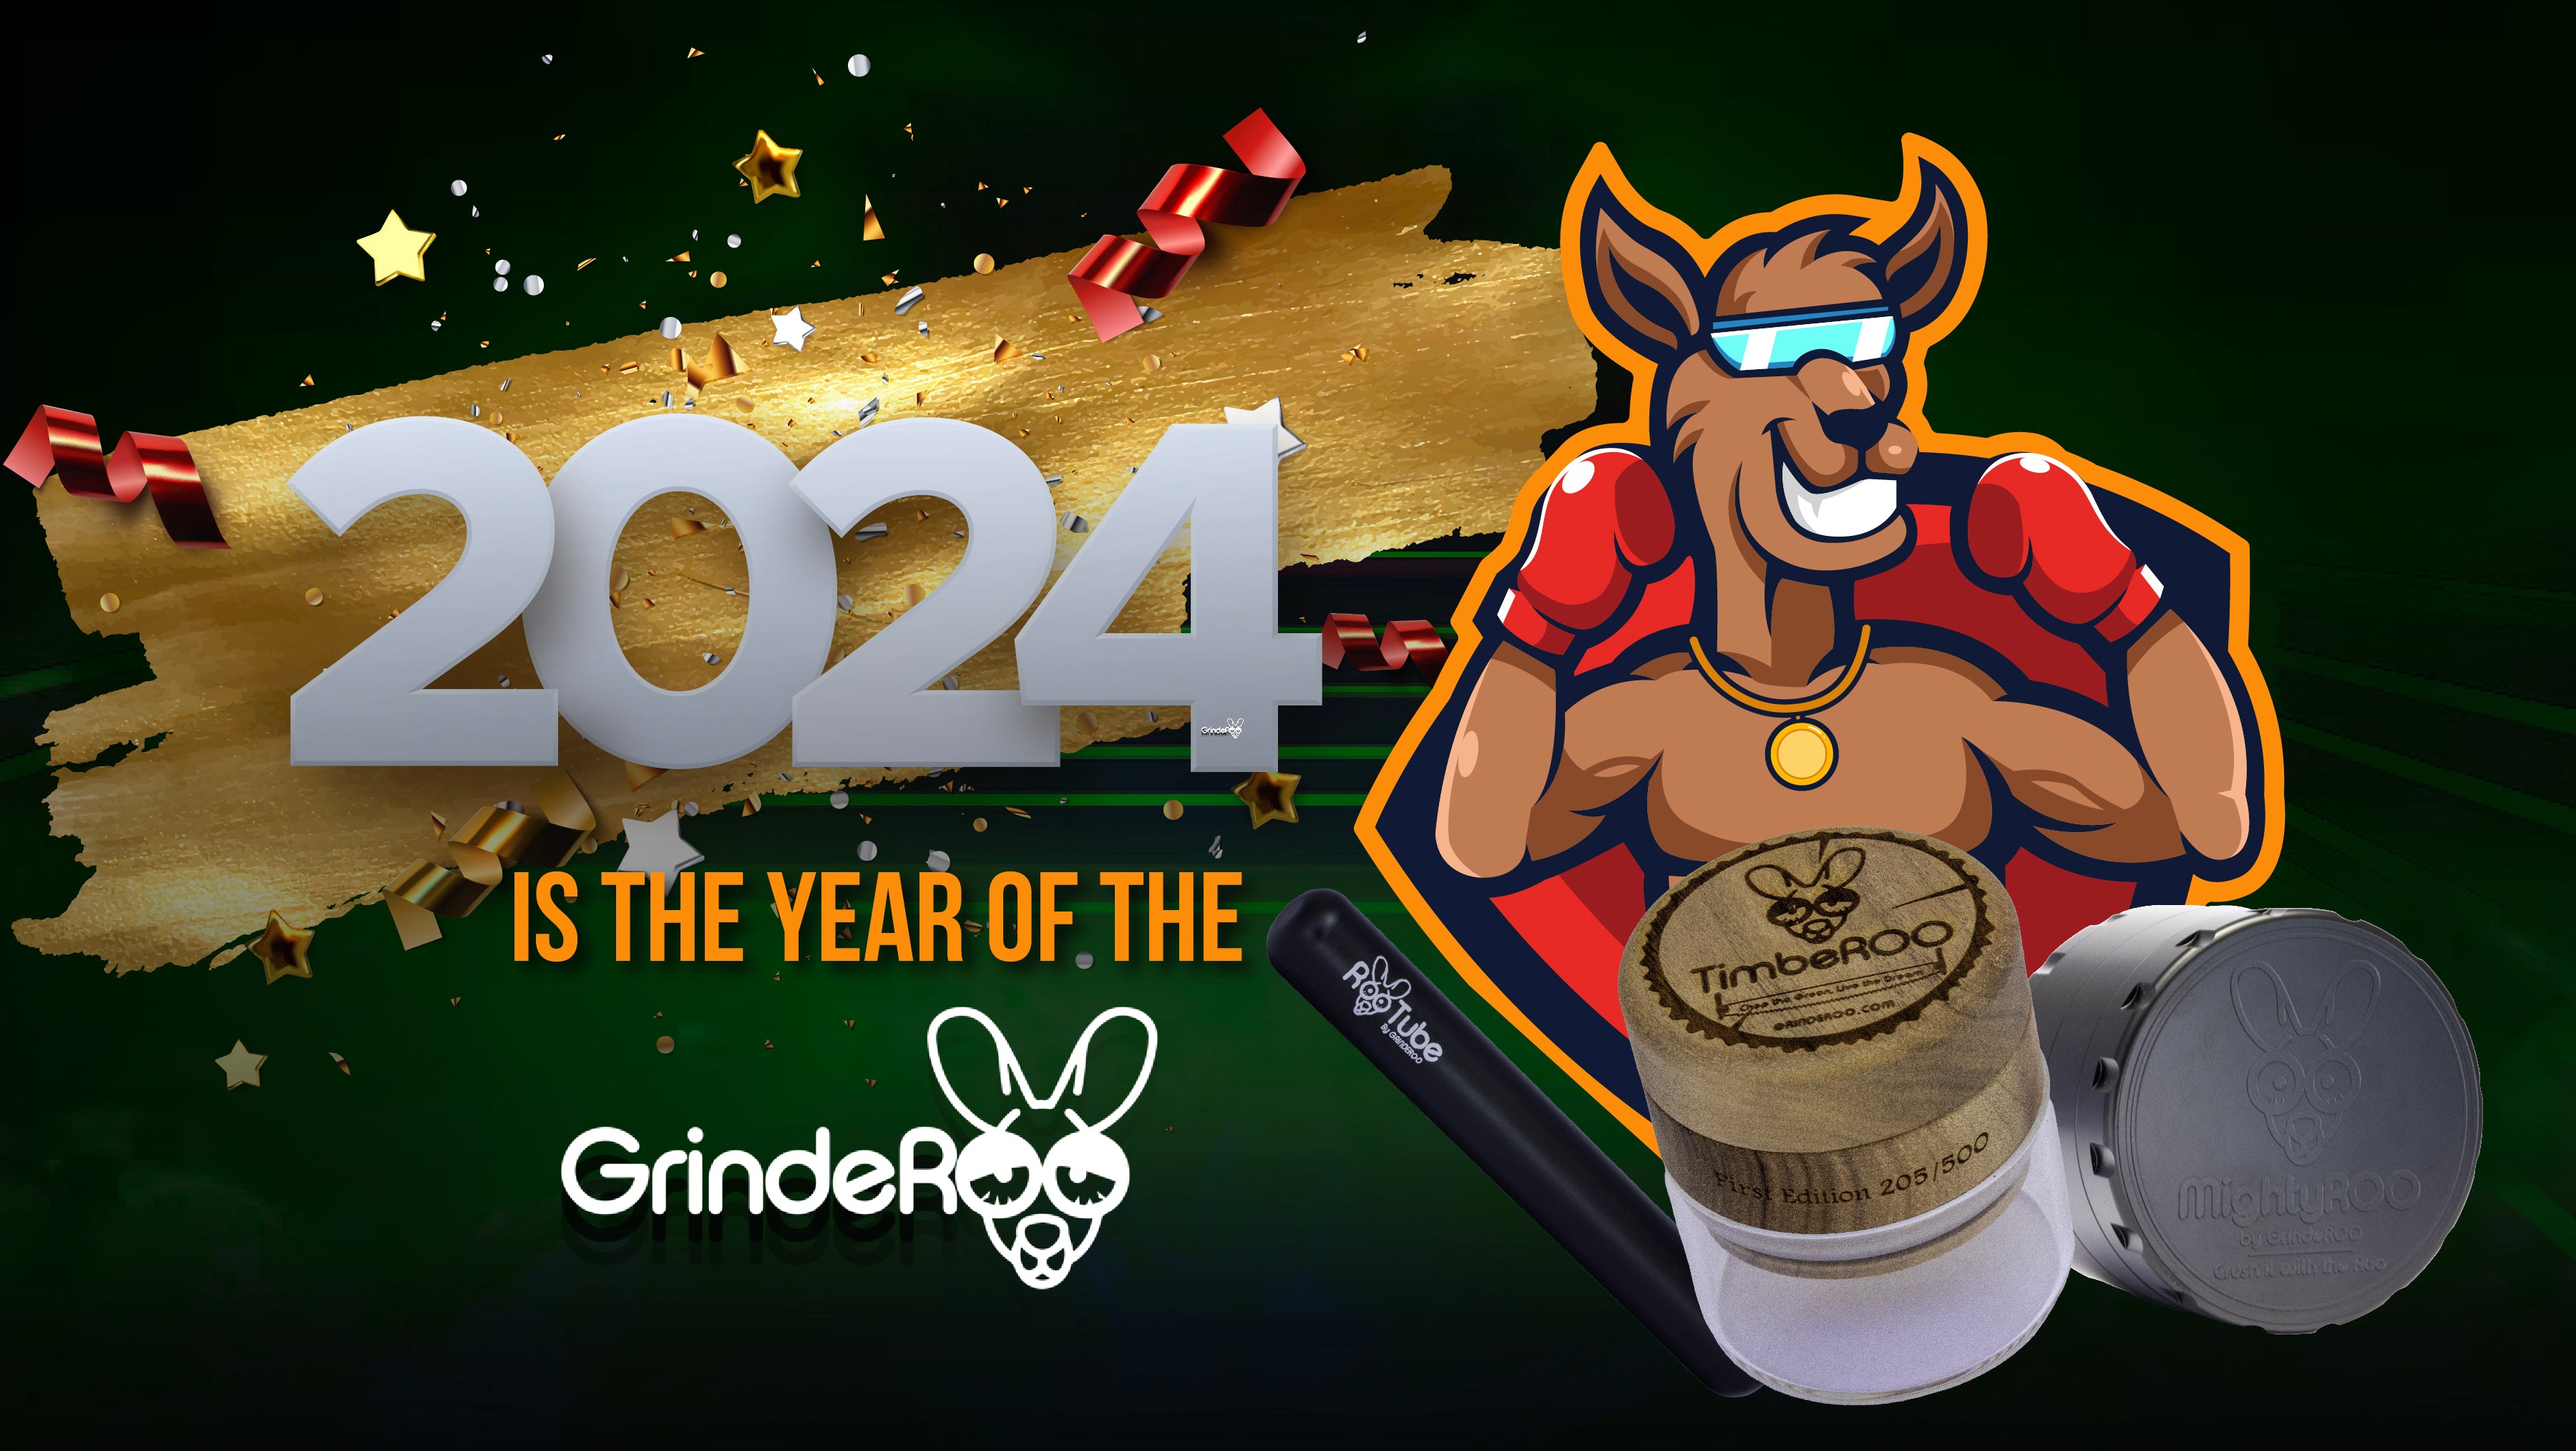 2024 is The Year of the Grinderoo!